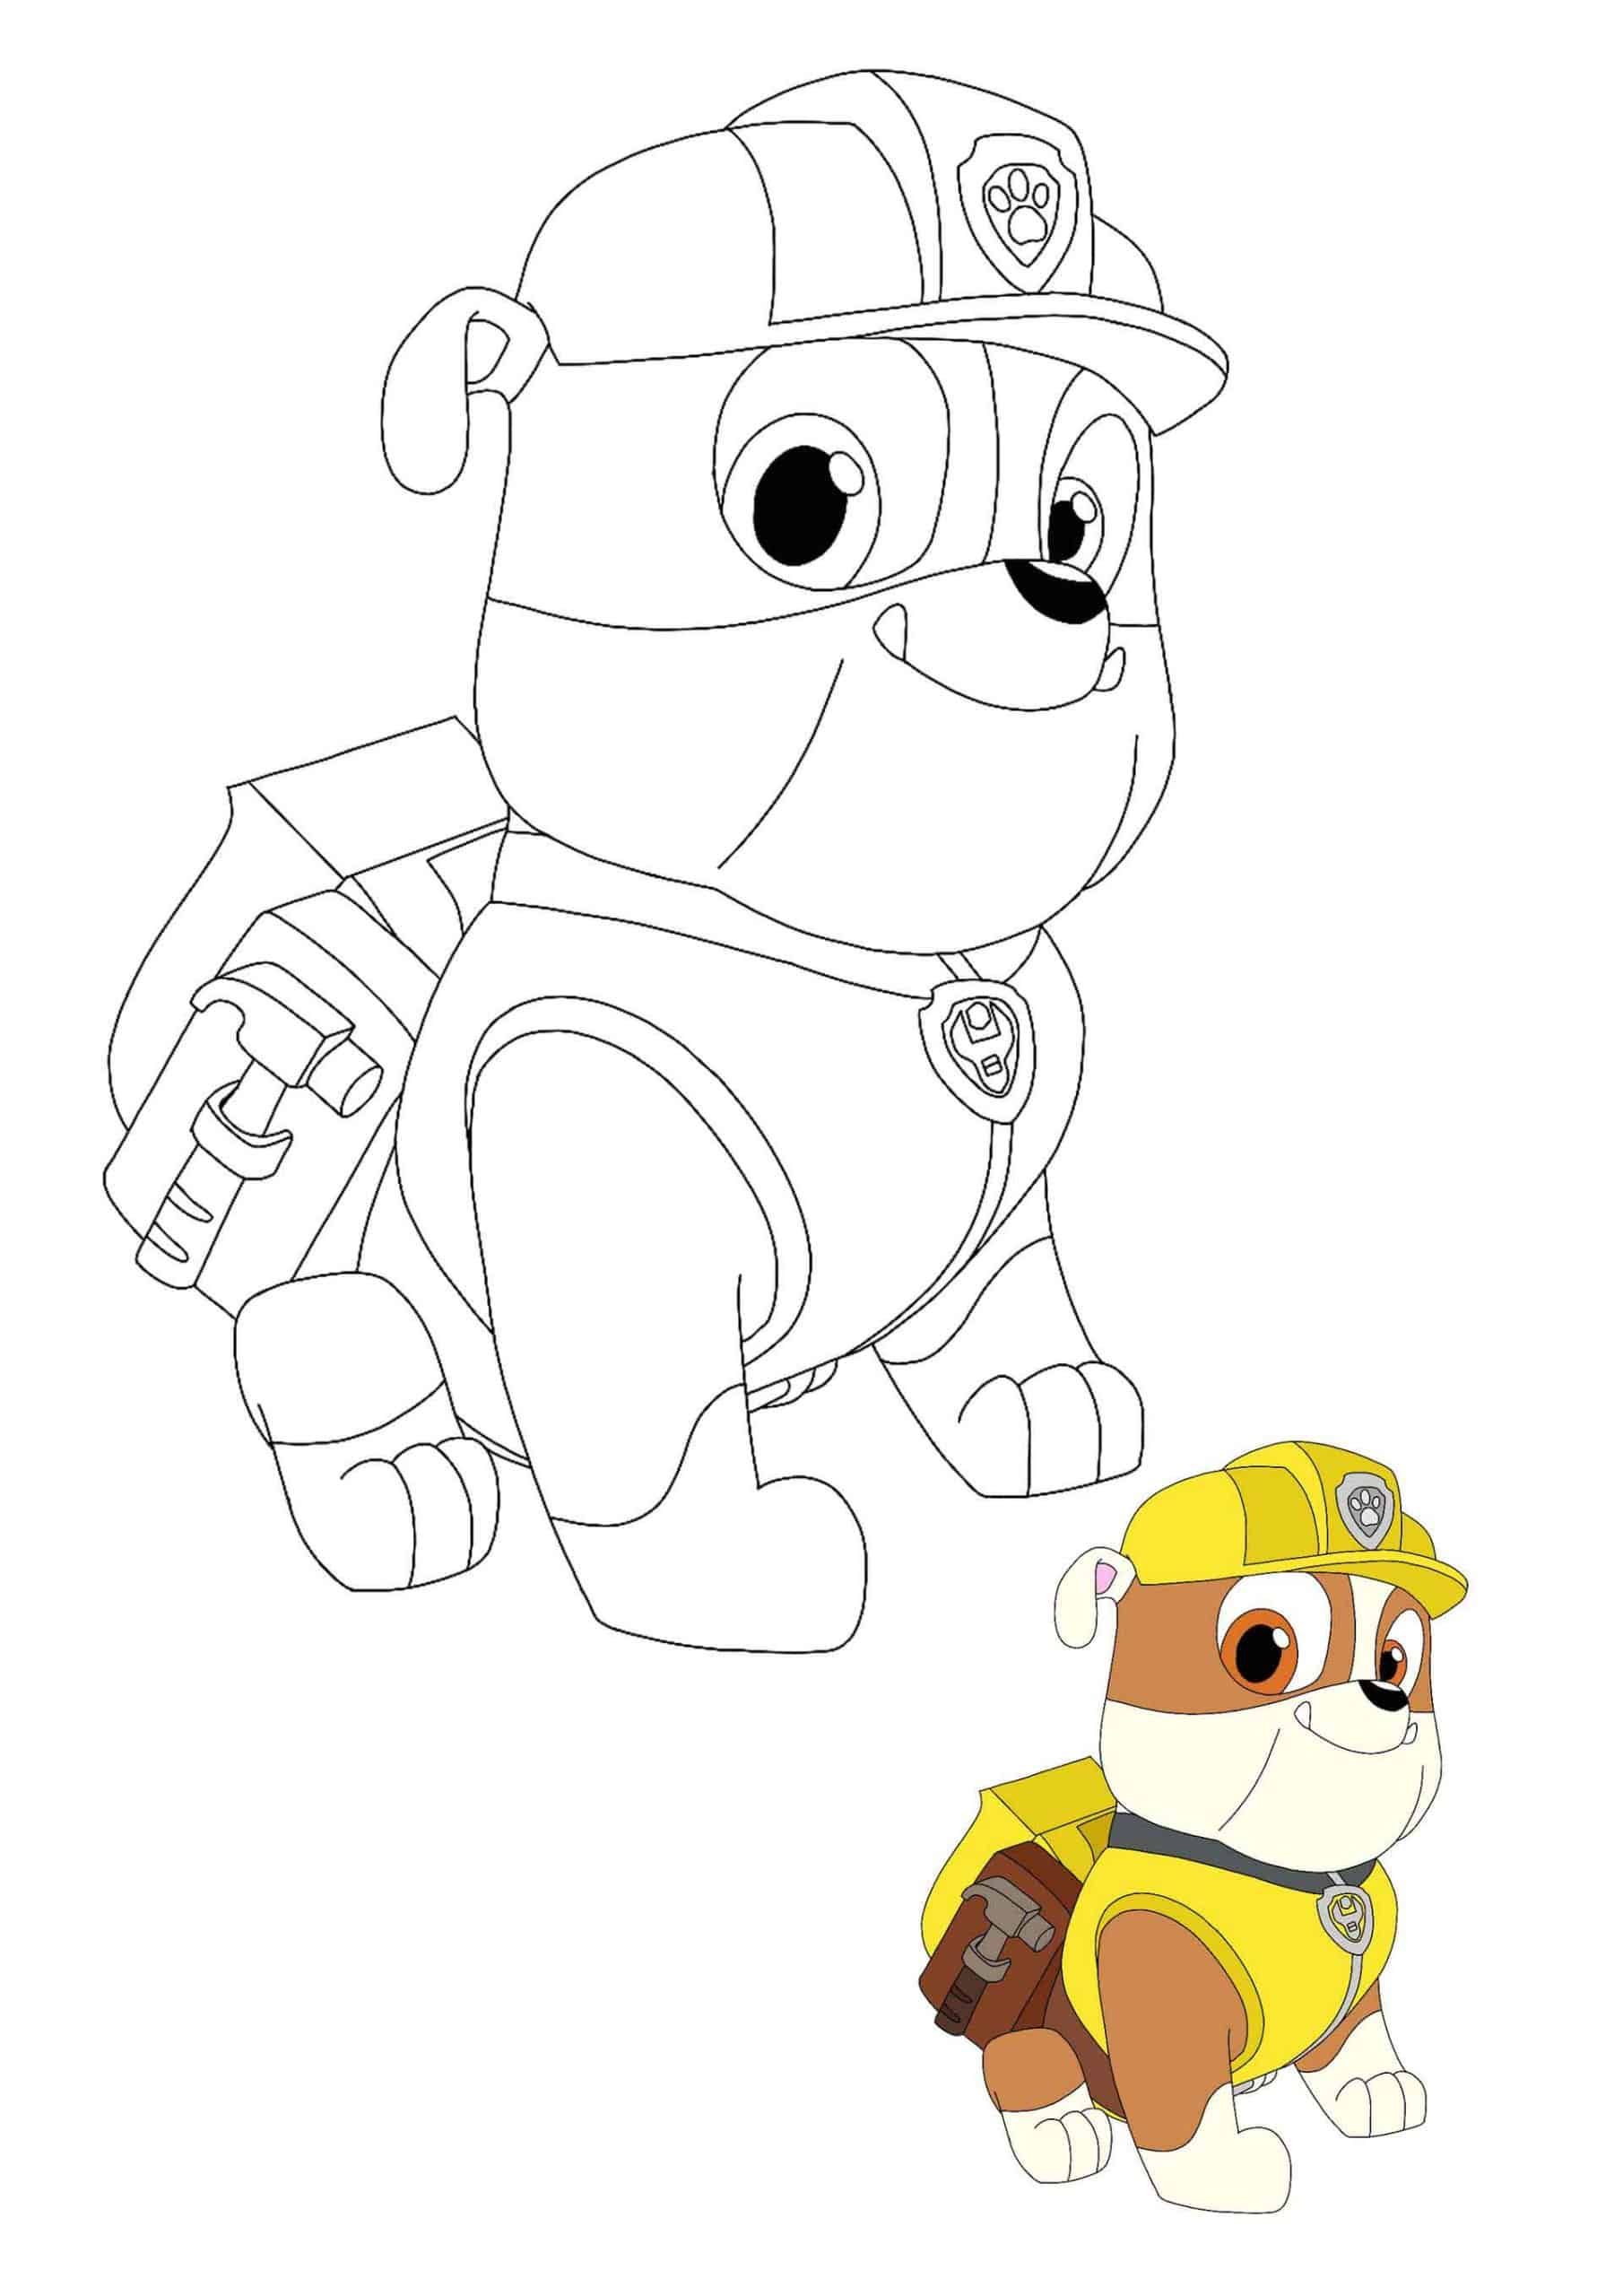 Paw patrol rubble coloring sheet with sample how to color paw patrol coloring pages paw patrol coloring paw patrol christmas